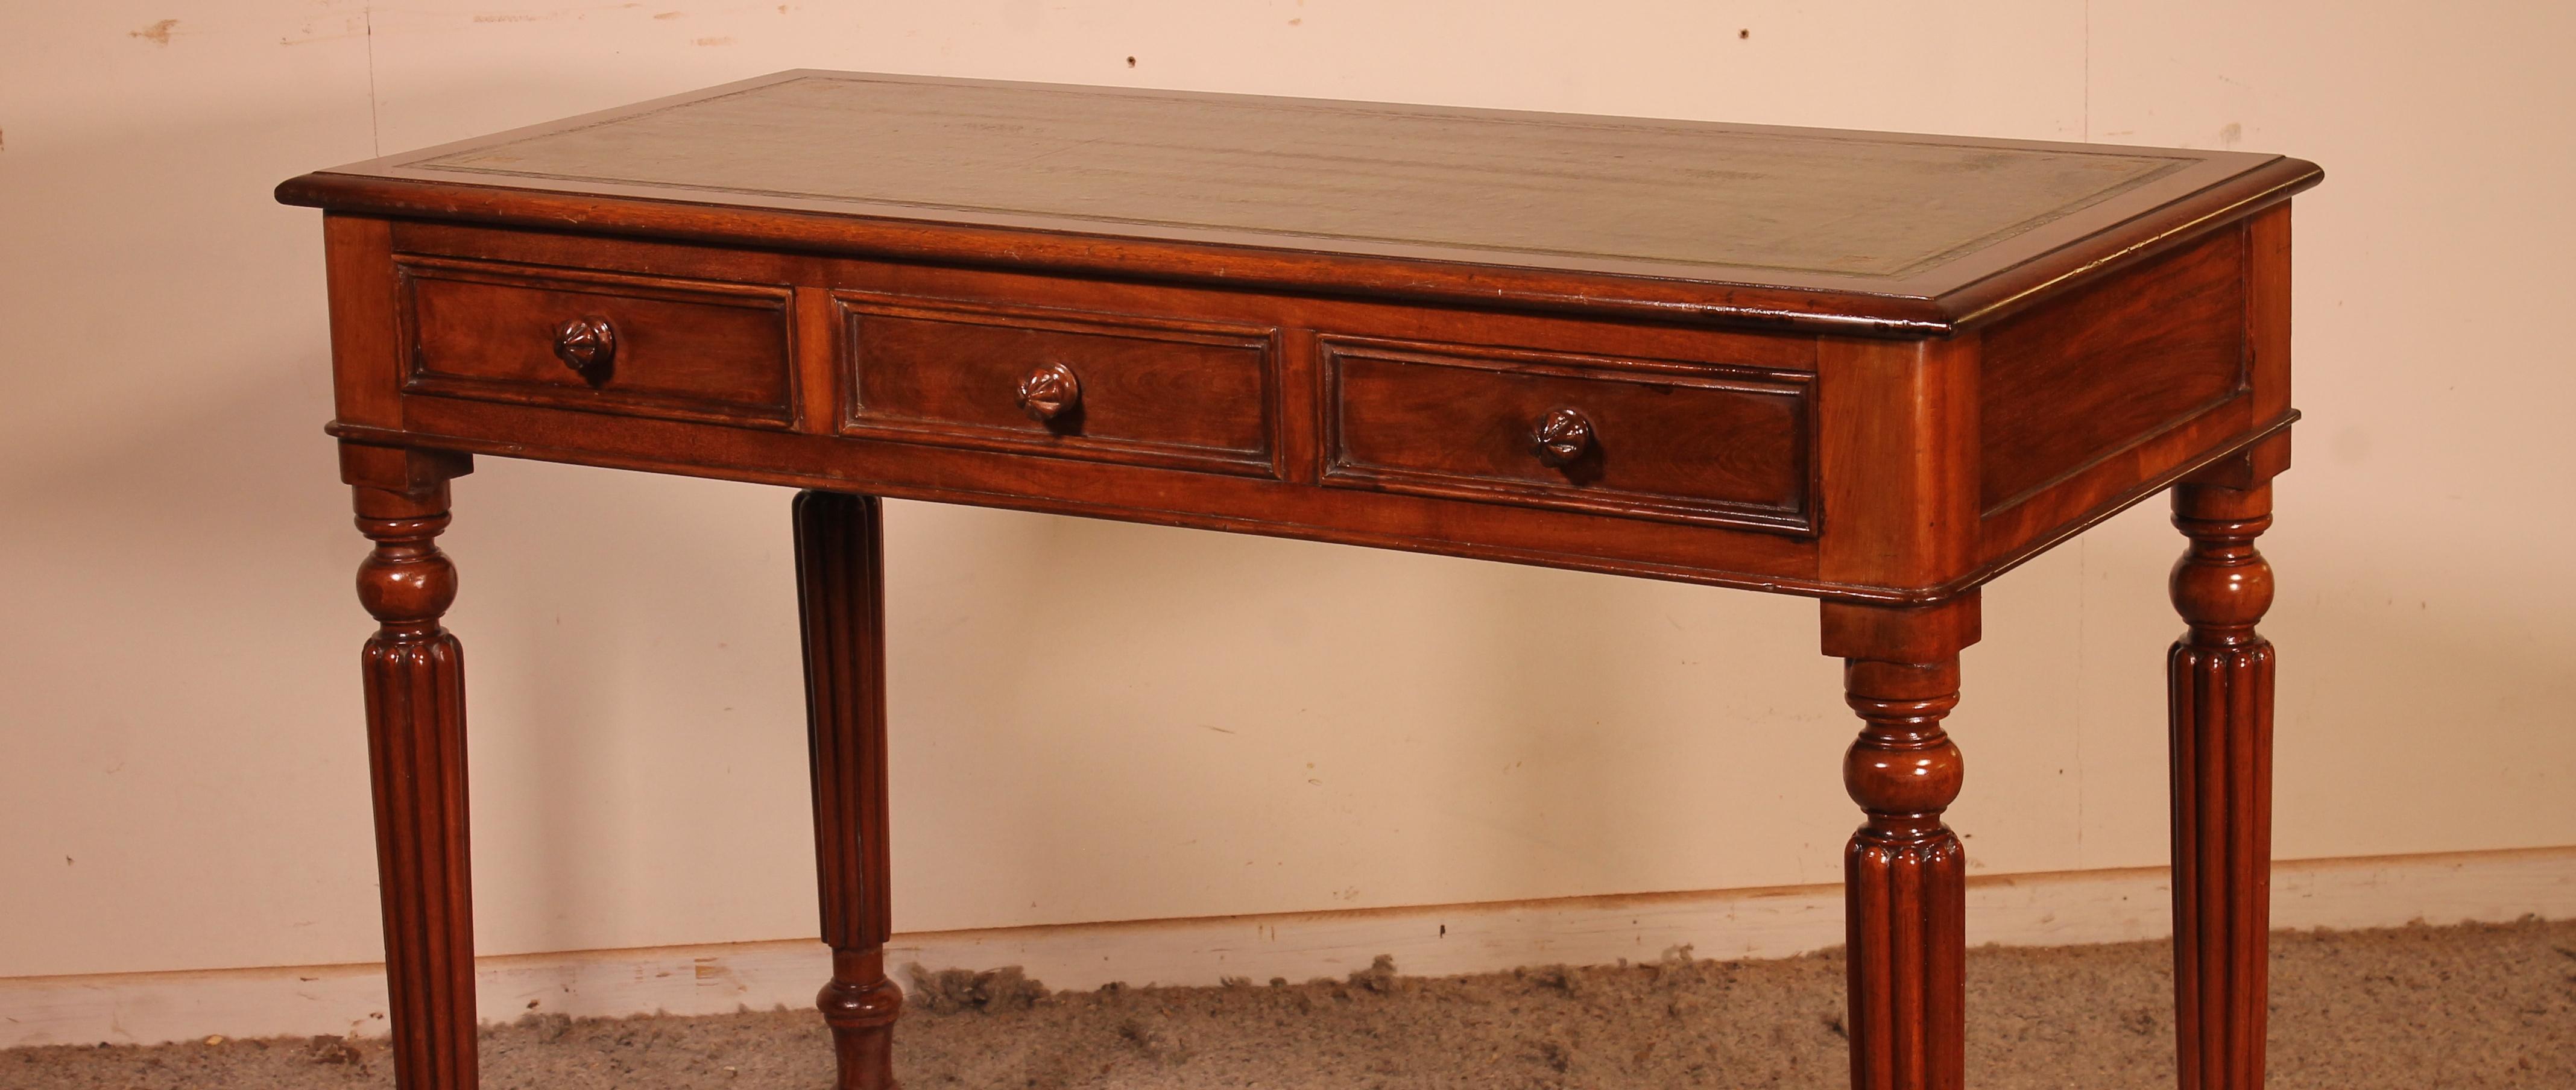 Victorian Small Desk / Writing Table Inmahogany from the 19th Century